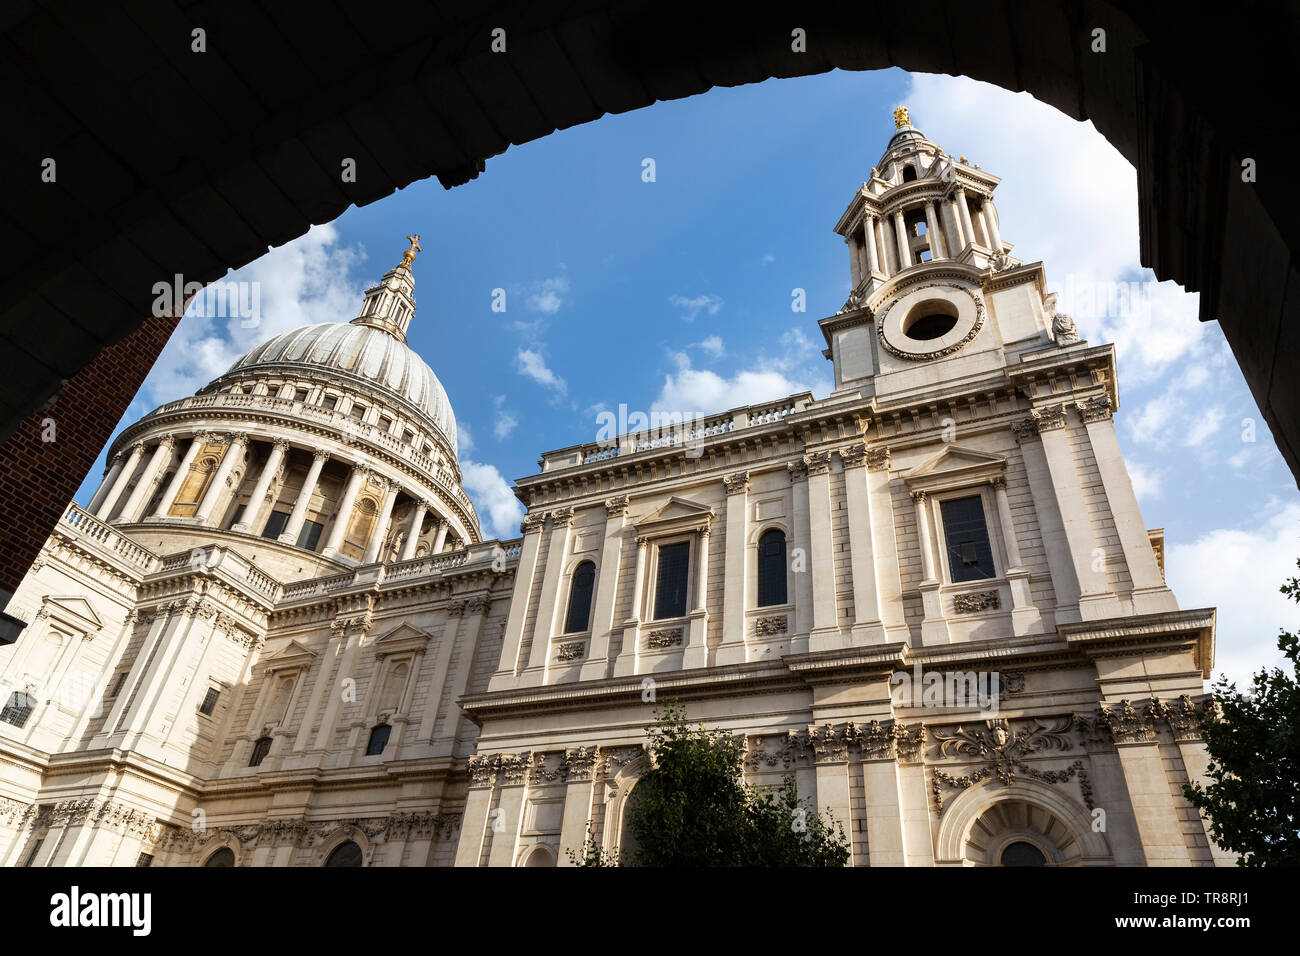 St Paul's Cathedral viewed through the temple Bar archway in the City of London, England, UK. Stock Photo